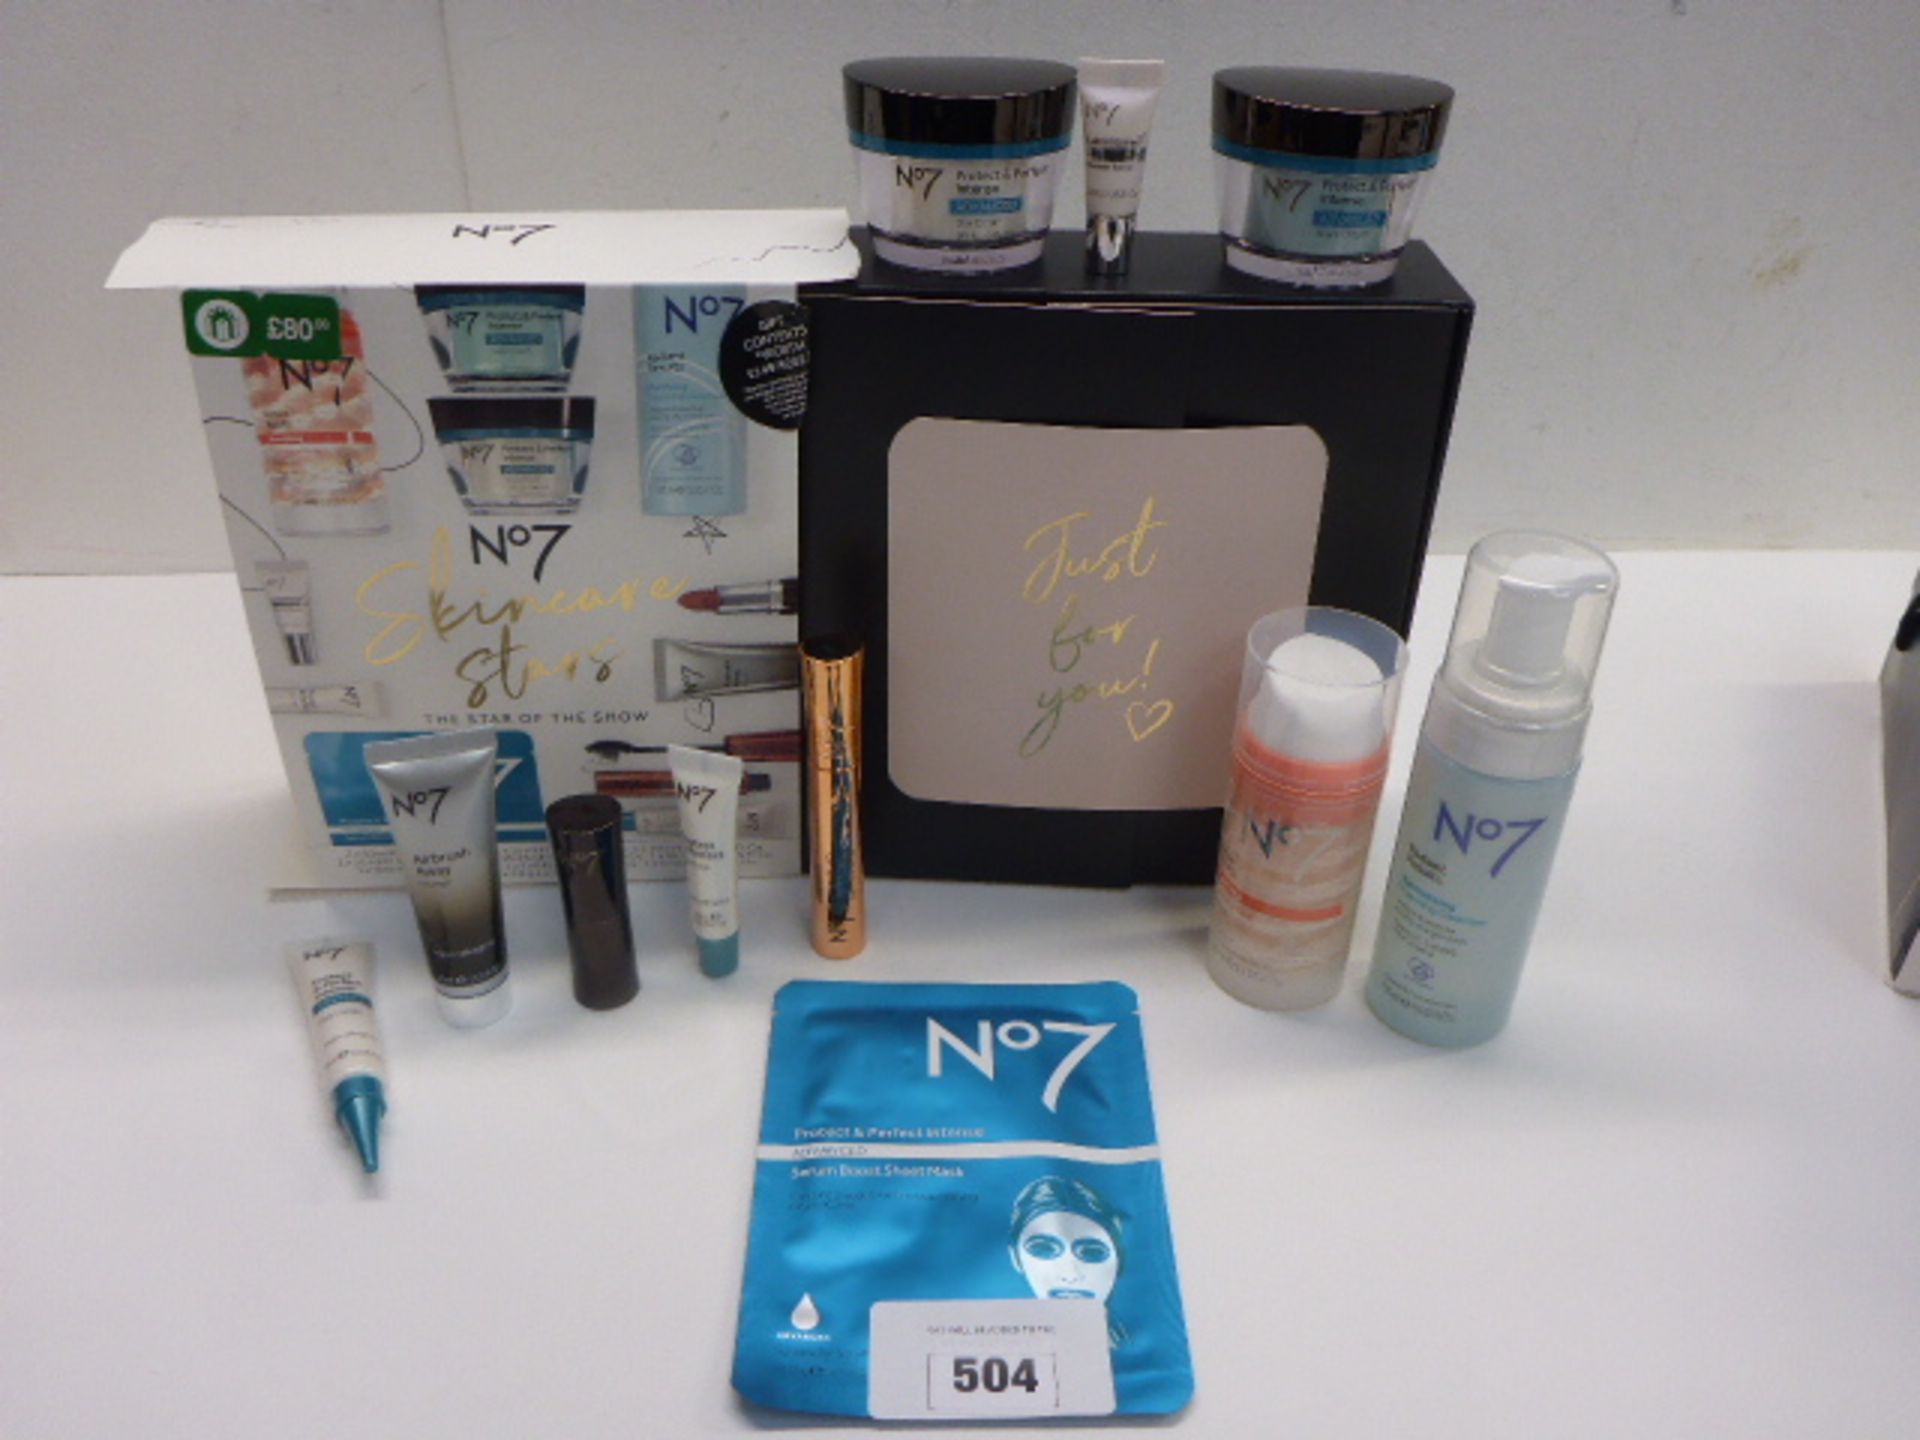 No. 7 Skincare Stars 'The Star of the Show' beauty gift box